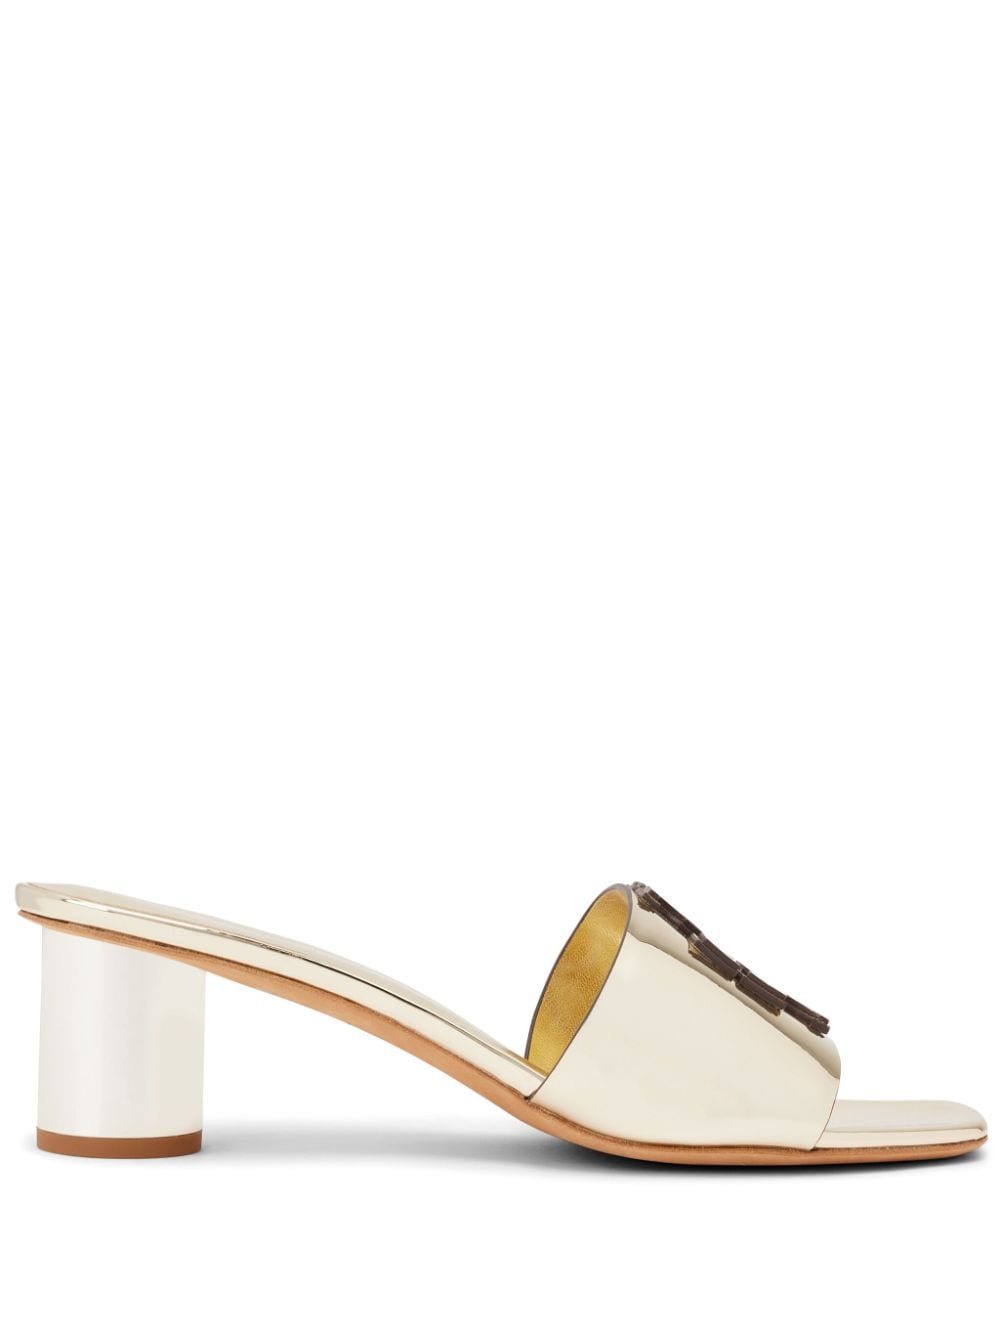 Tory Burch Ines Mule leather sandals White